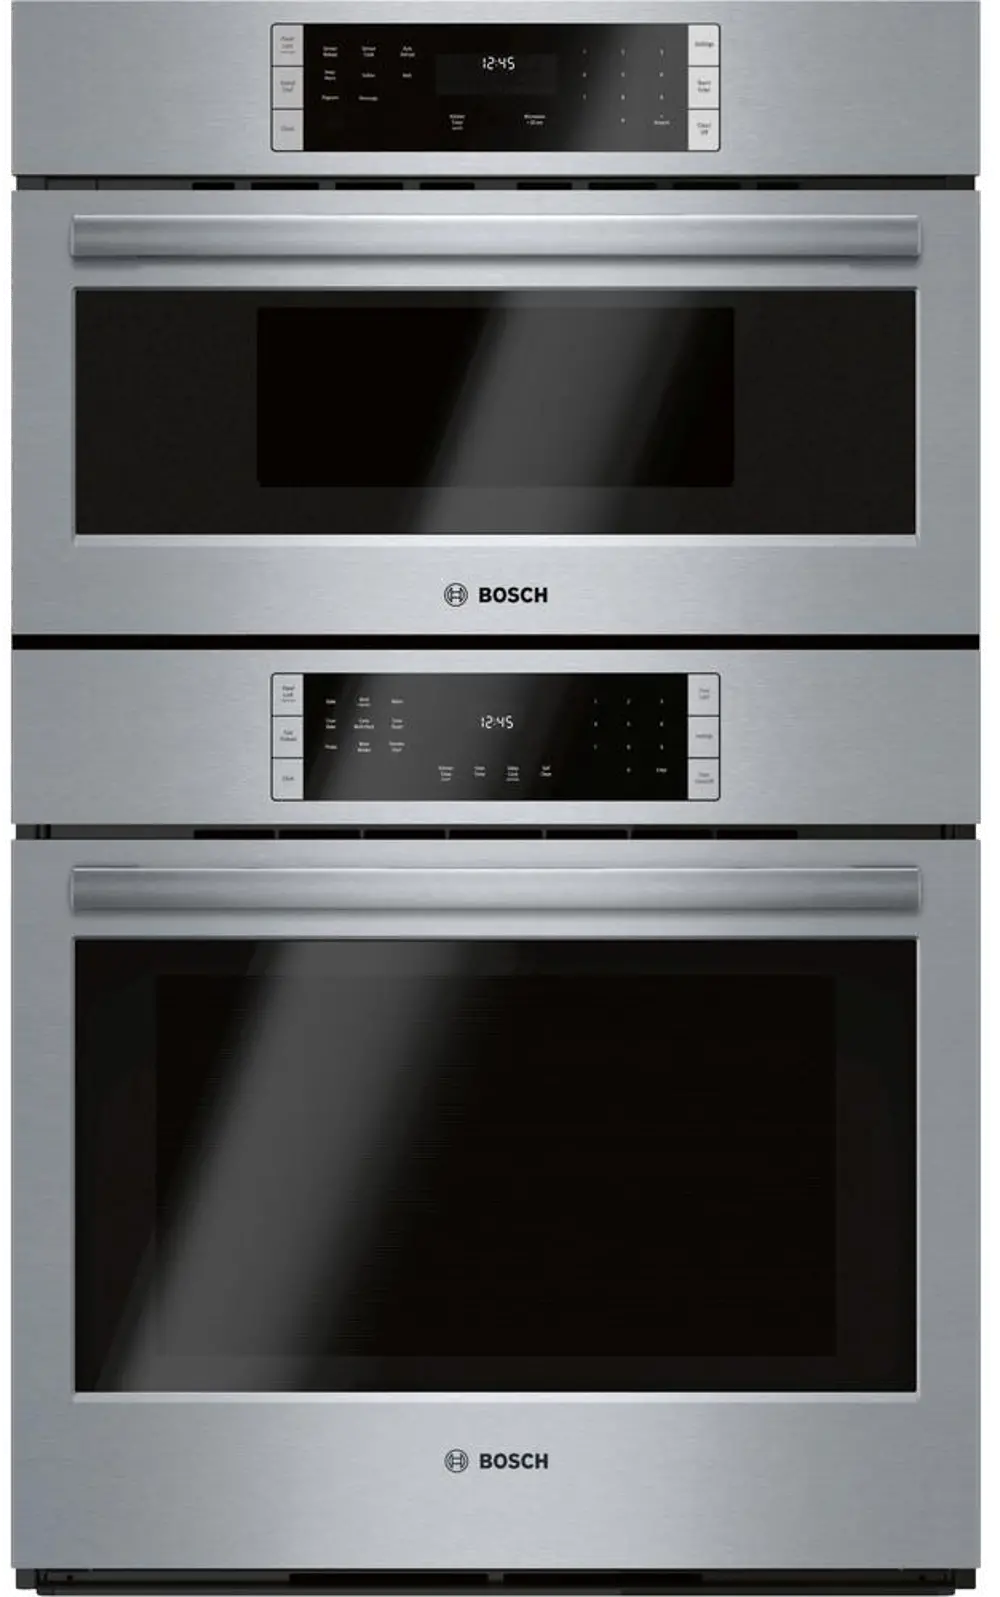 HBL87M53UC Bosch 800 Series 8.2 cu ft Combination Wall Oven - Stainless Steel 30 Inch-1